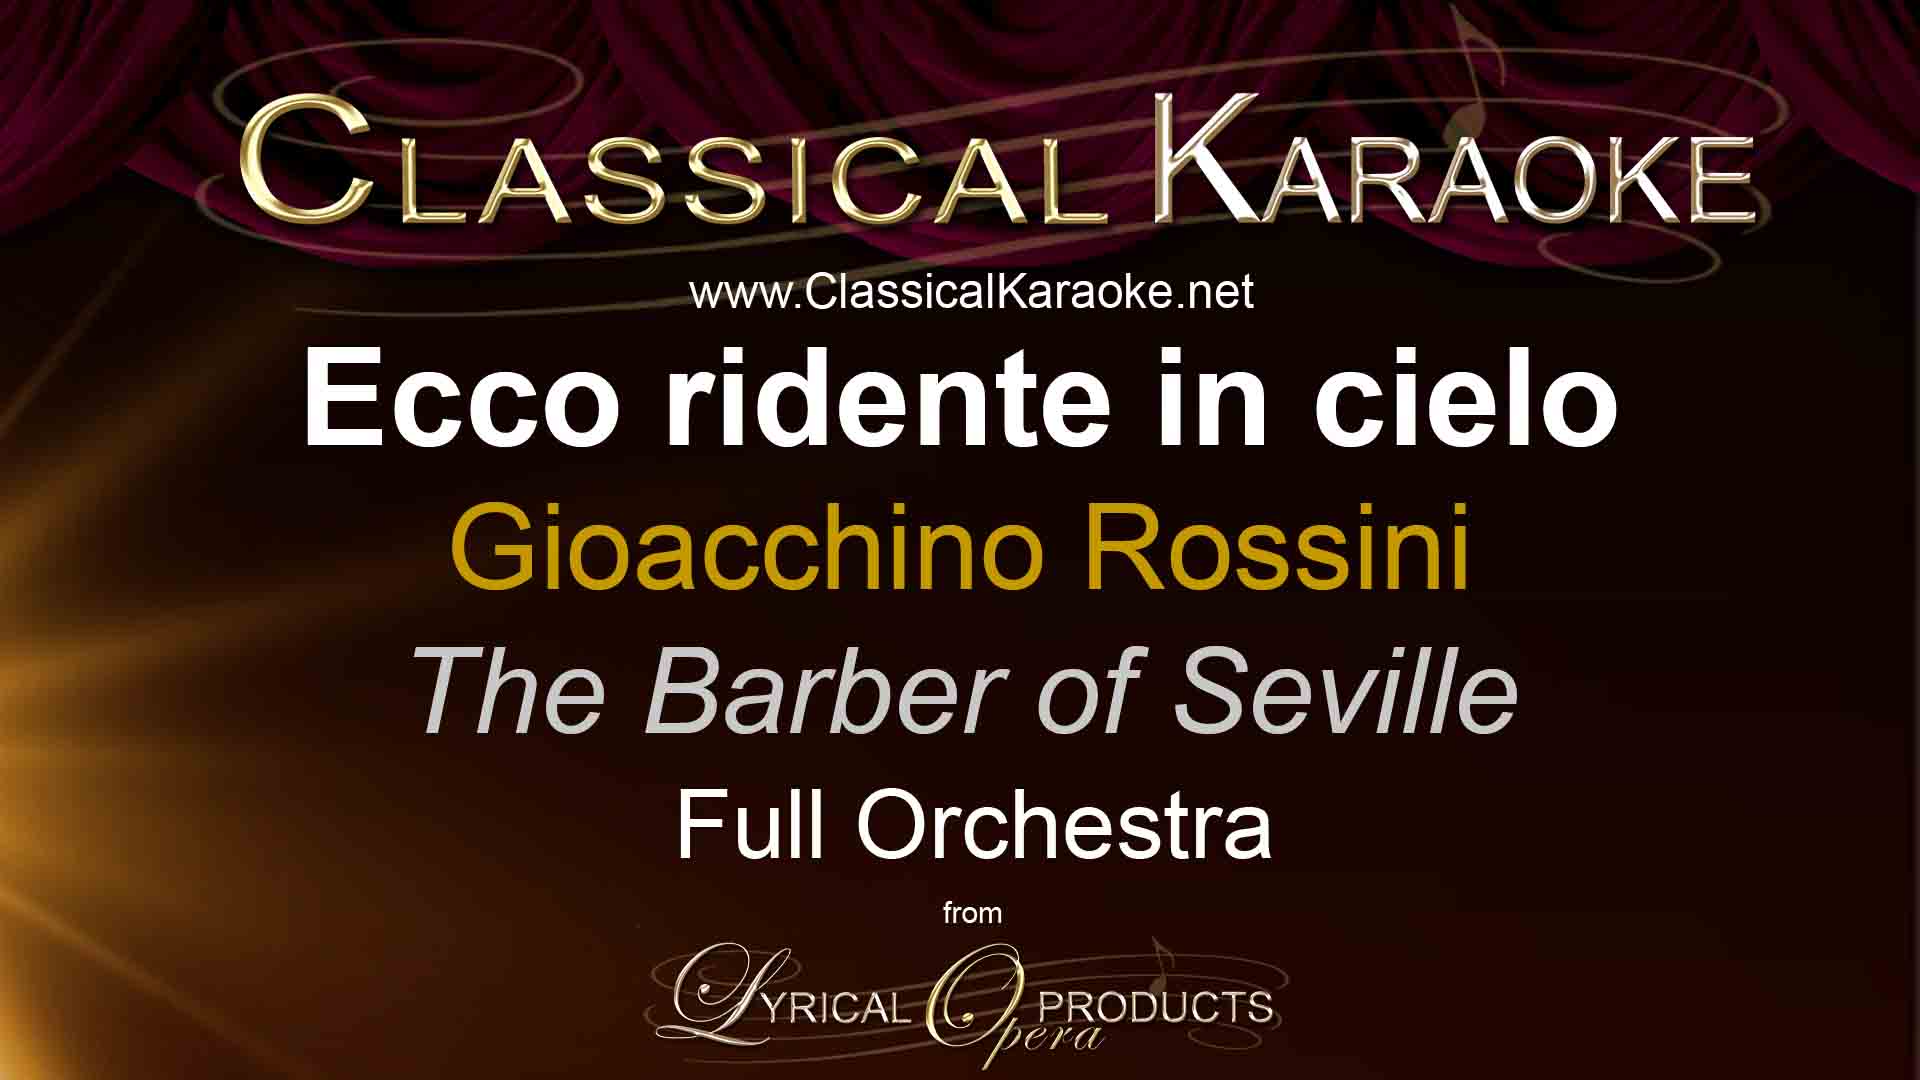 Ecco ridente in cielo, from The Barber of Seville, Full Orchestral Accompaniment (karaoke) track